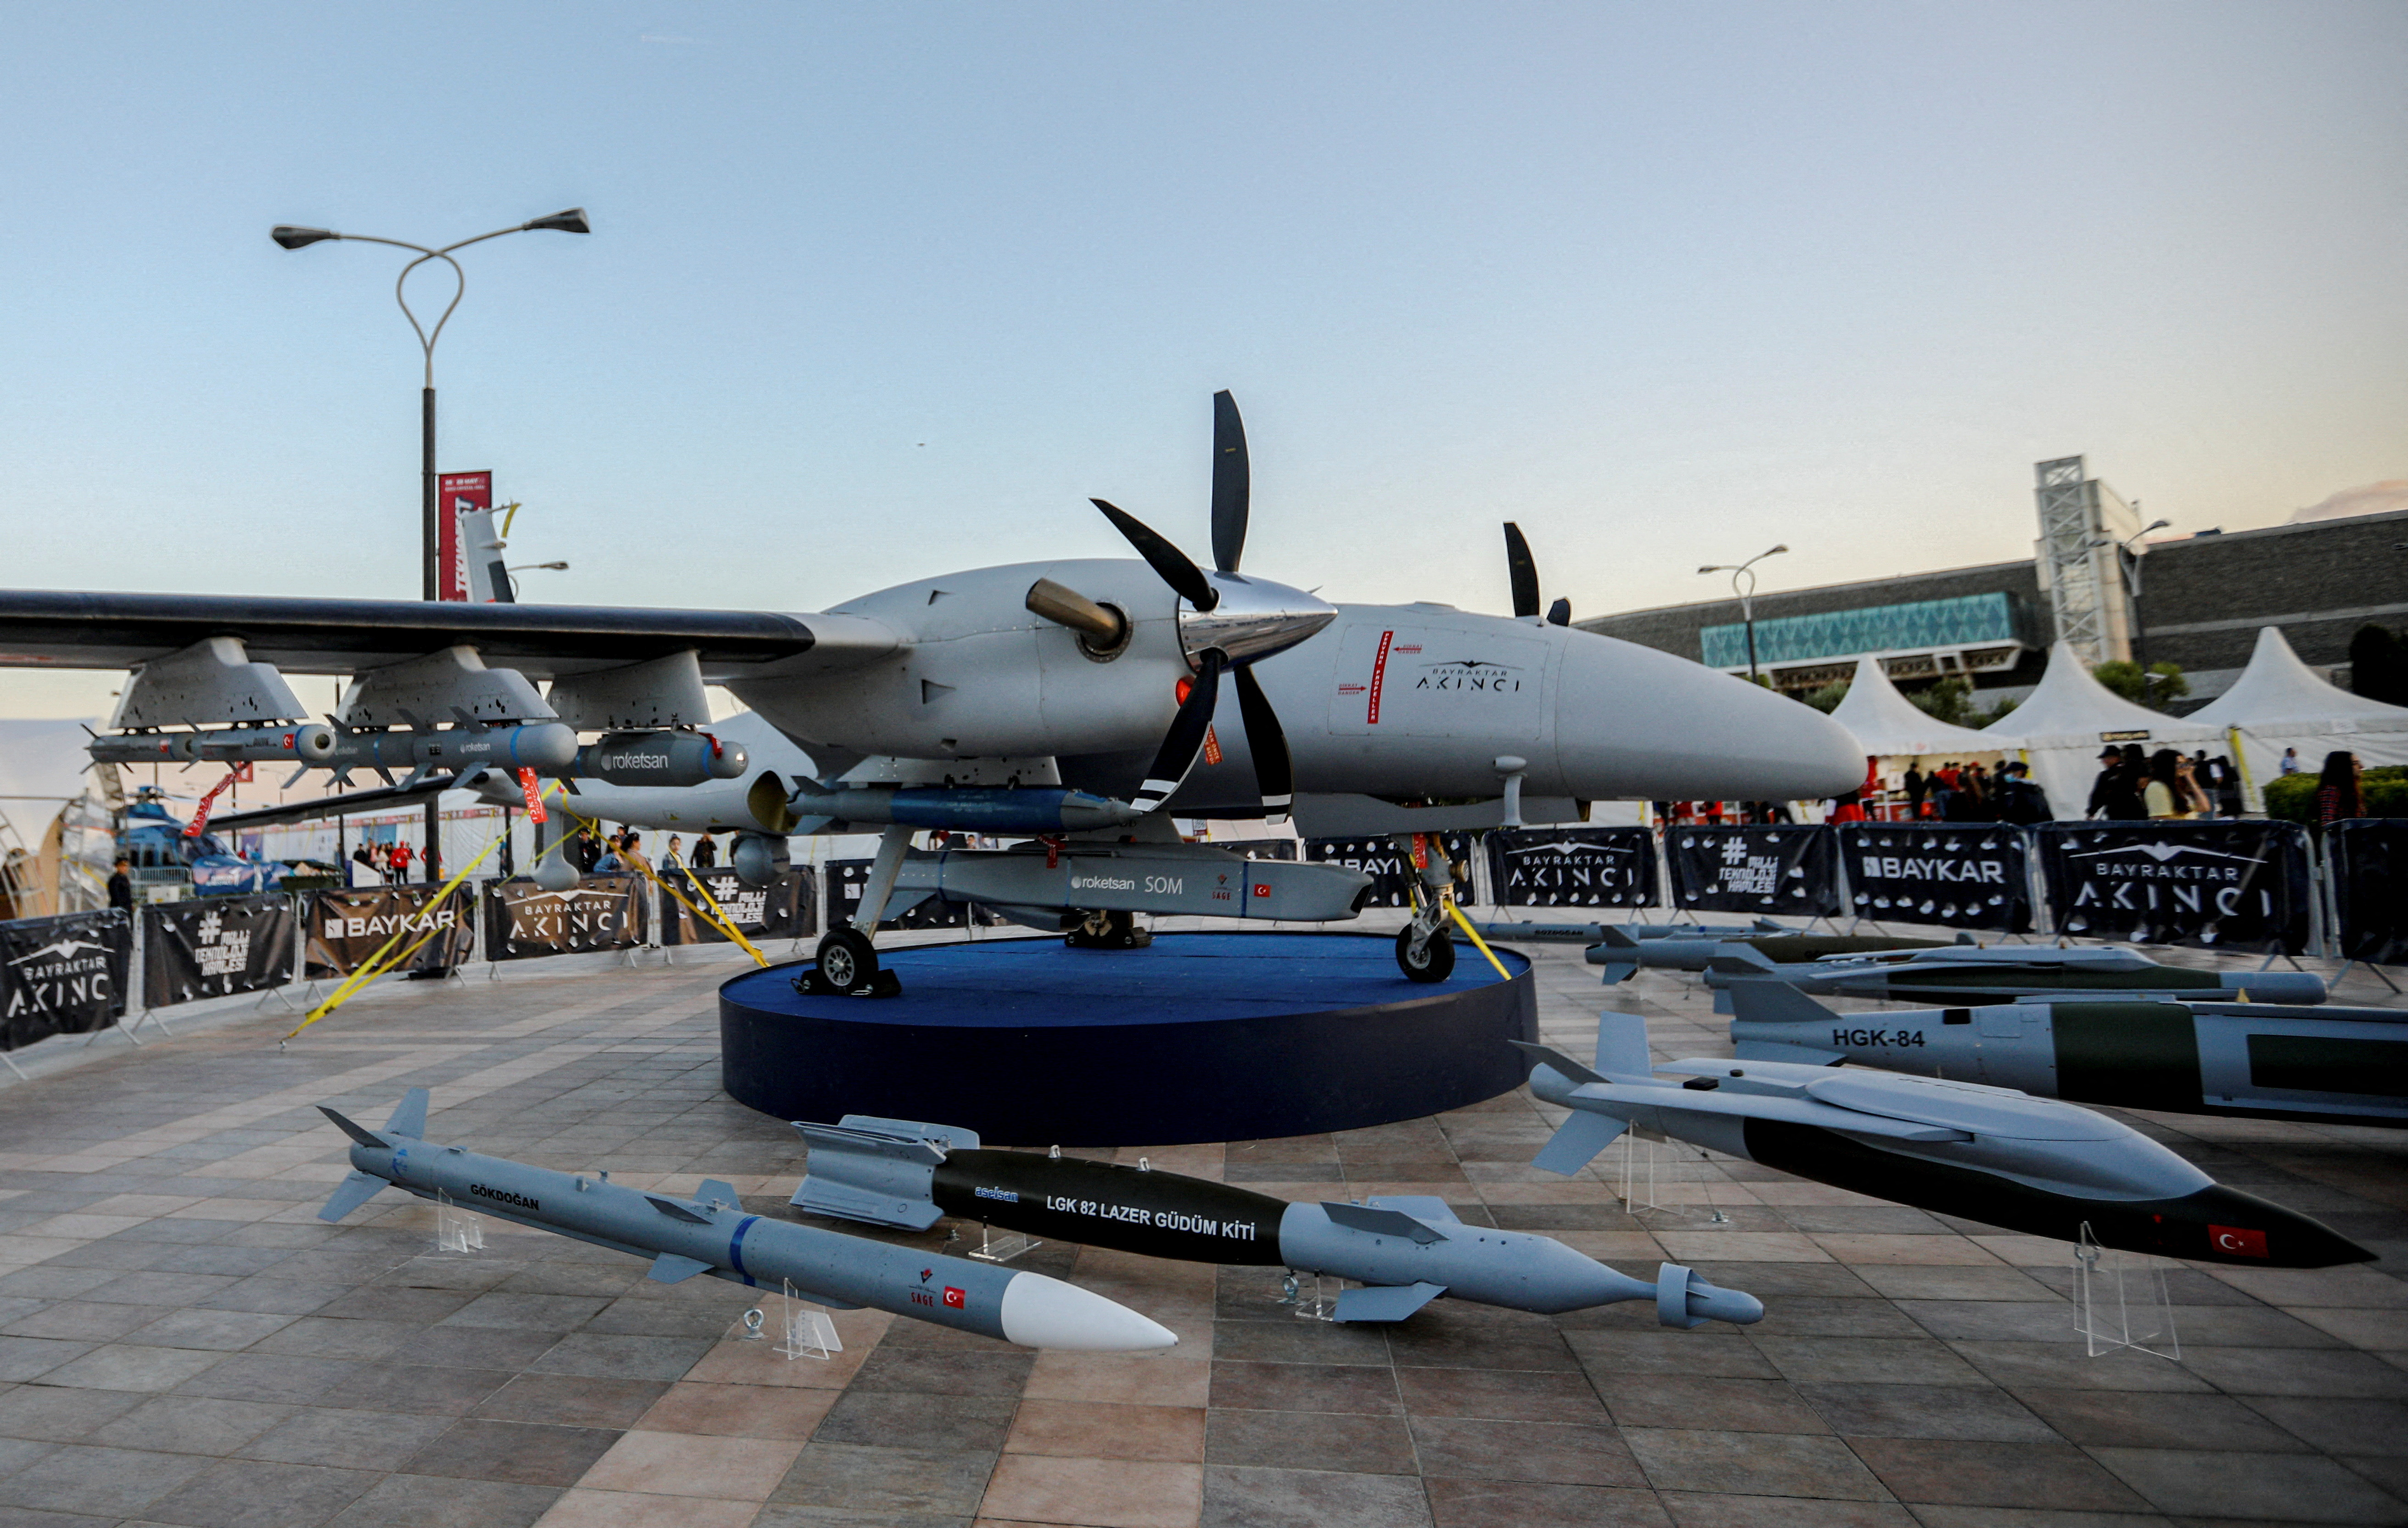 A Bayraktar Akinci drone is exhibited at an aerospace and technology festival in Baku